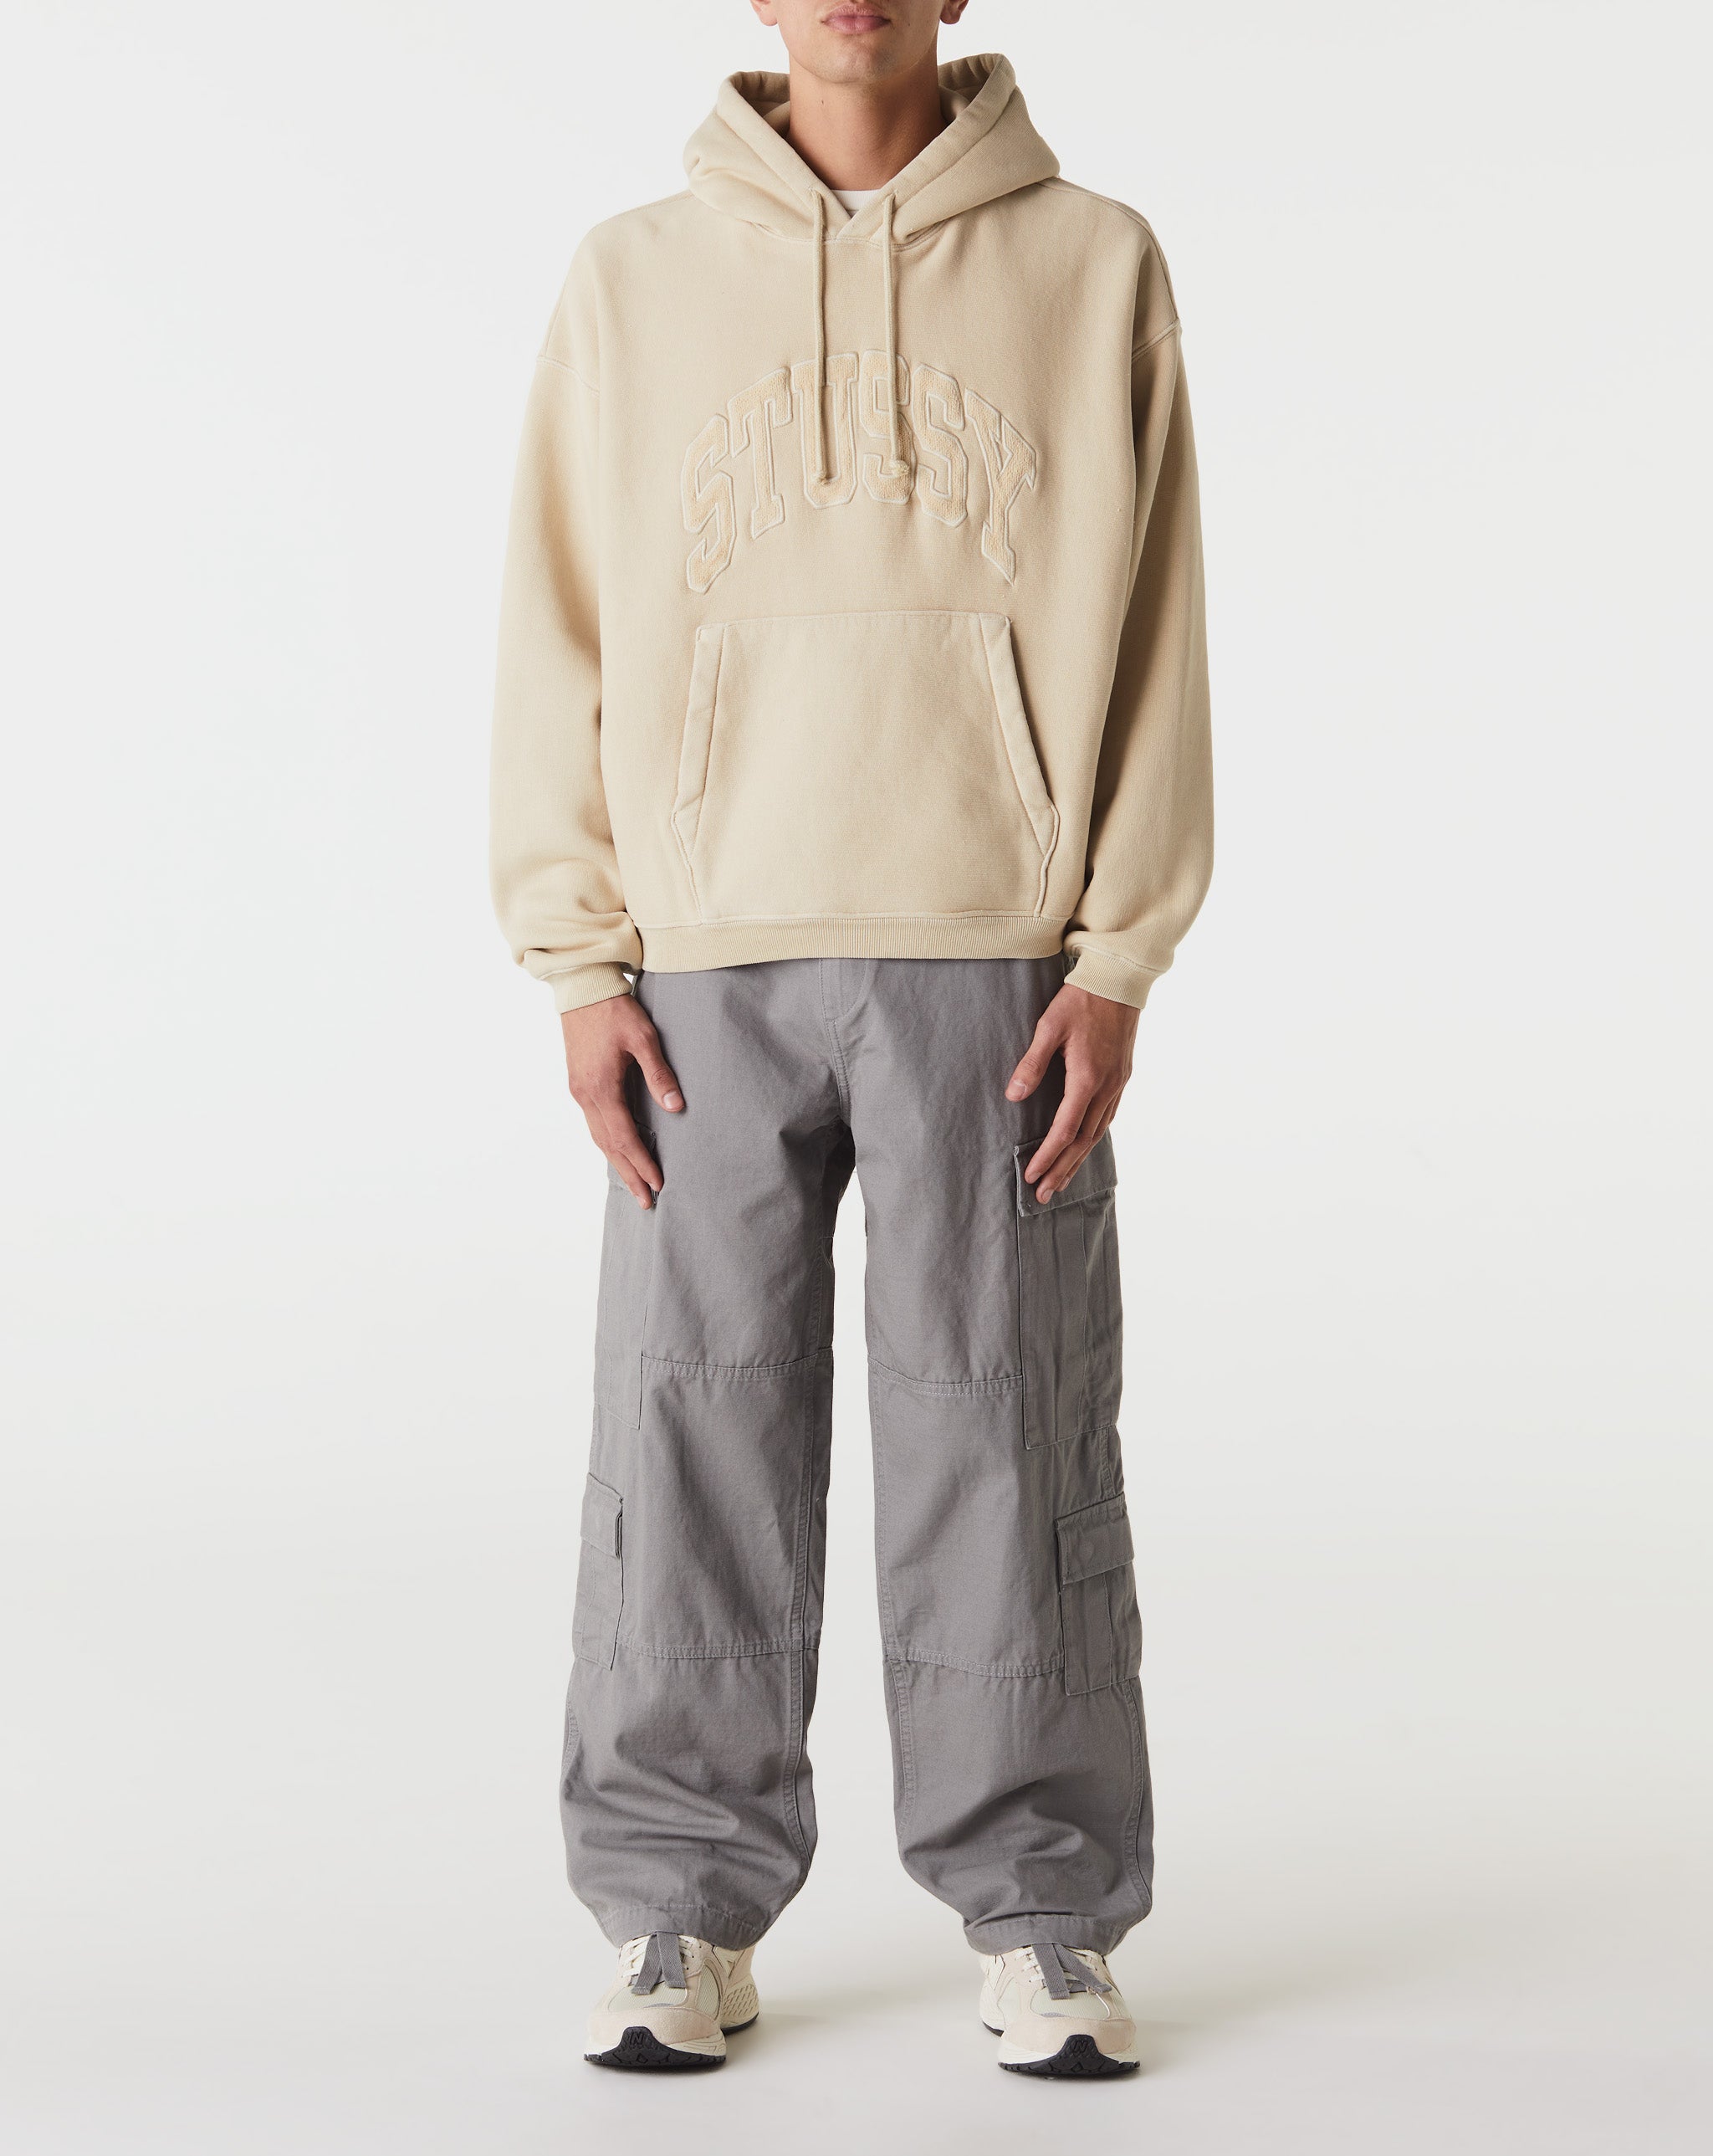 Stüssy Embroidered Relaxed Hoodie  - Cheap 127-0 Jordan outlet